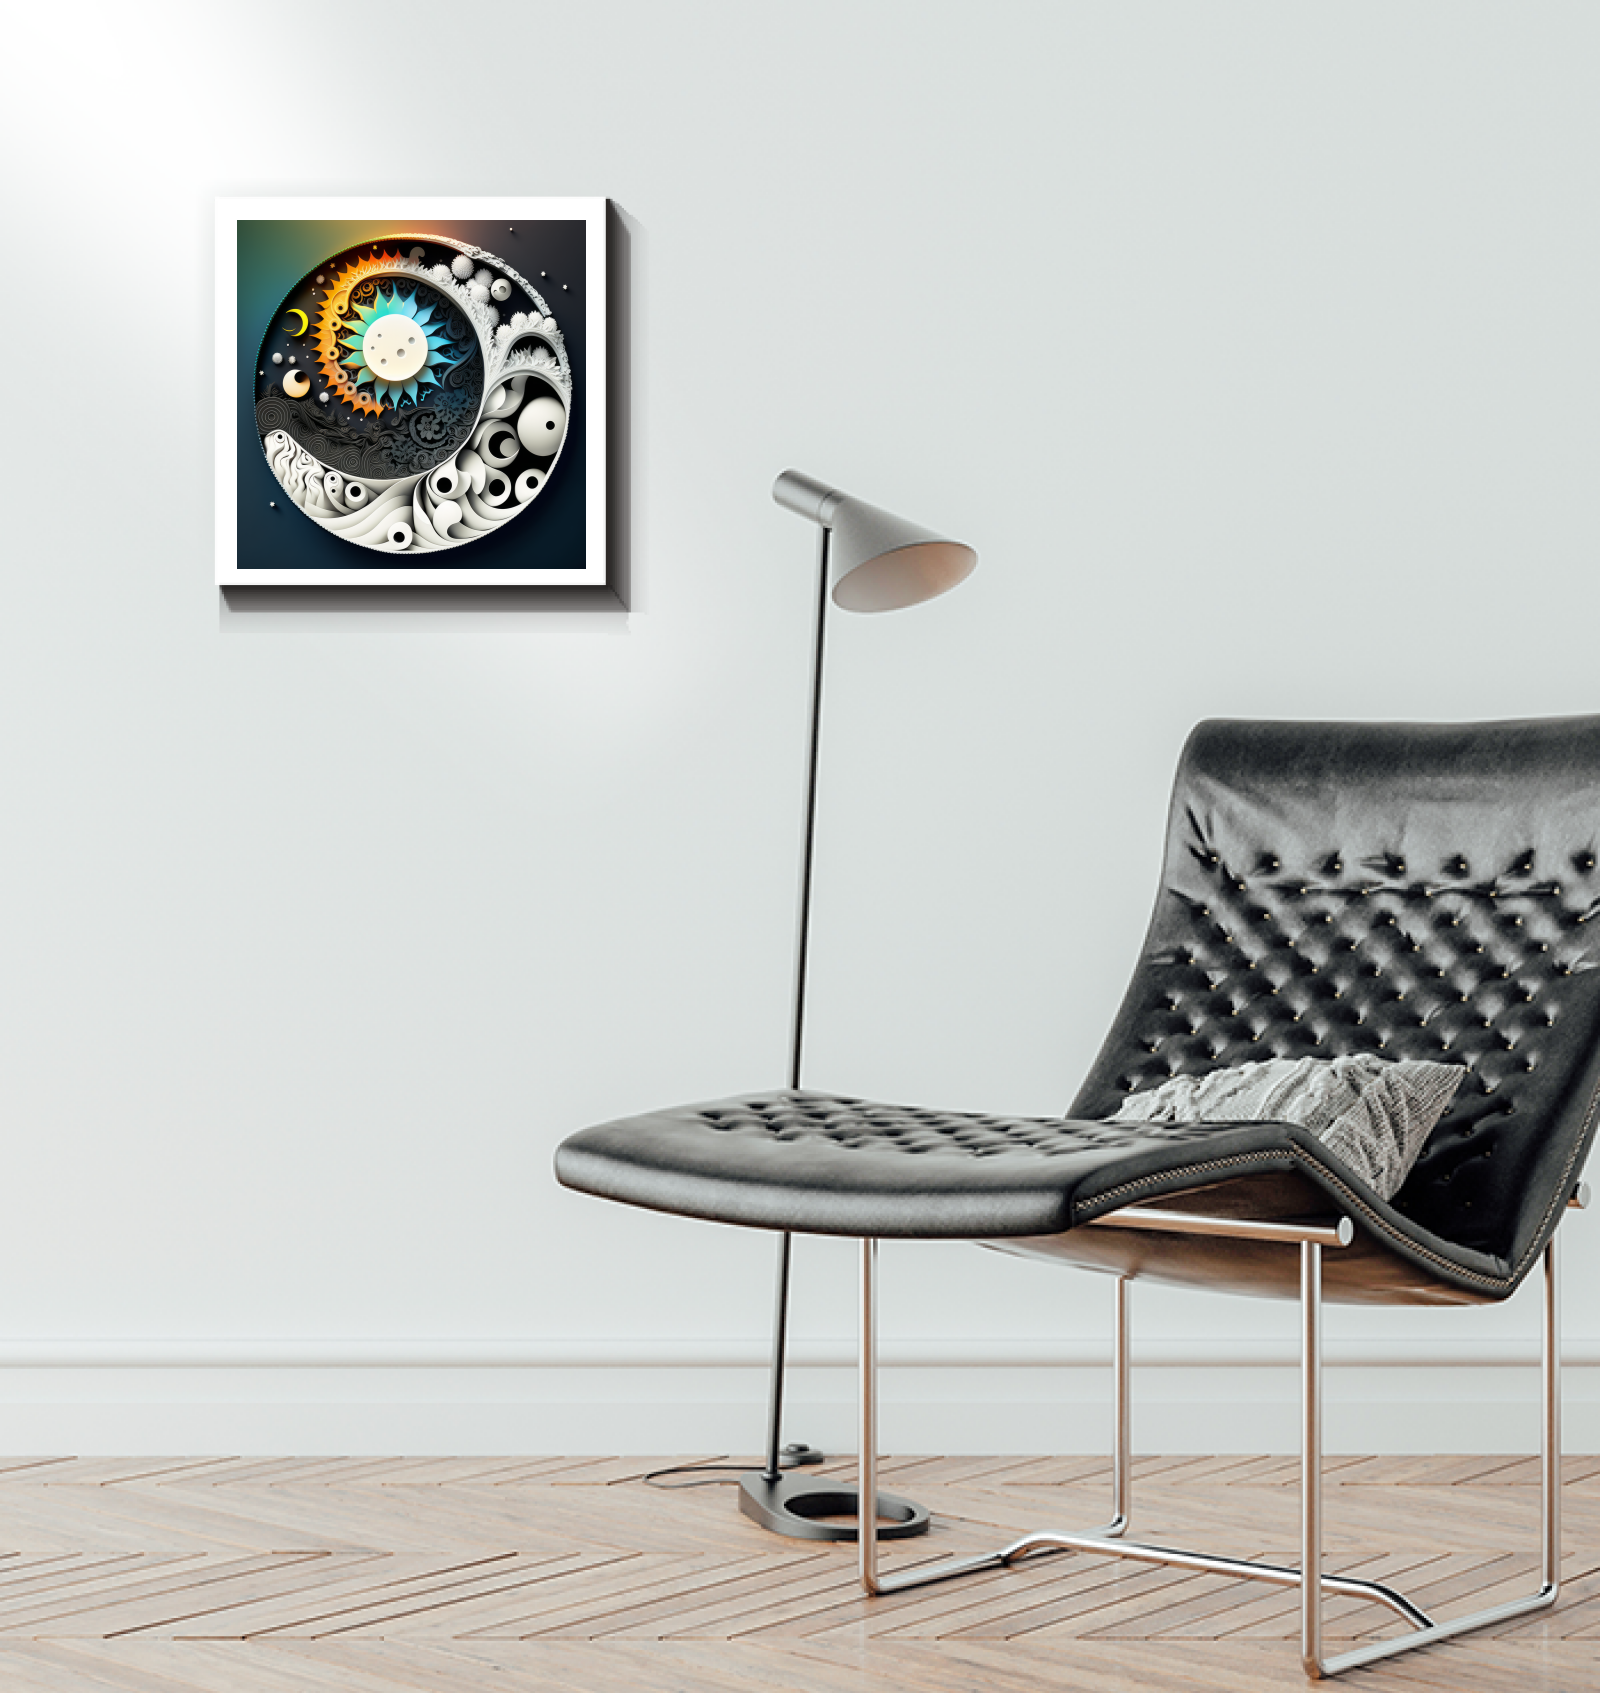 Sound waves and quiet spaces illustrated on canvas art.